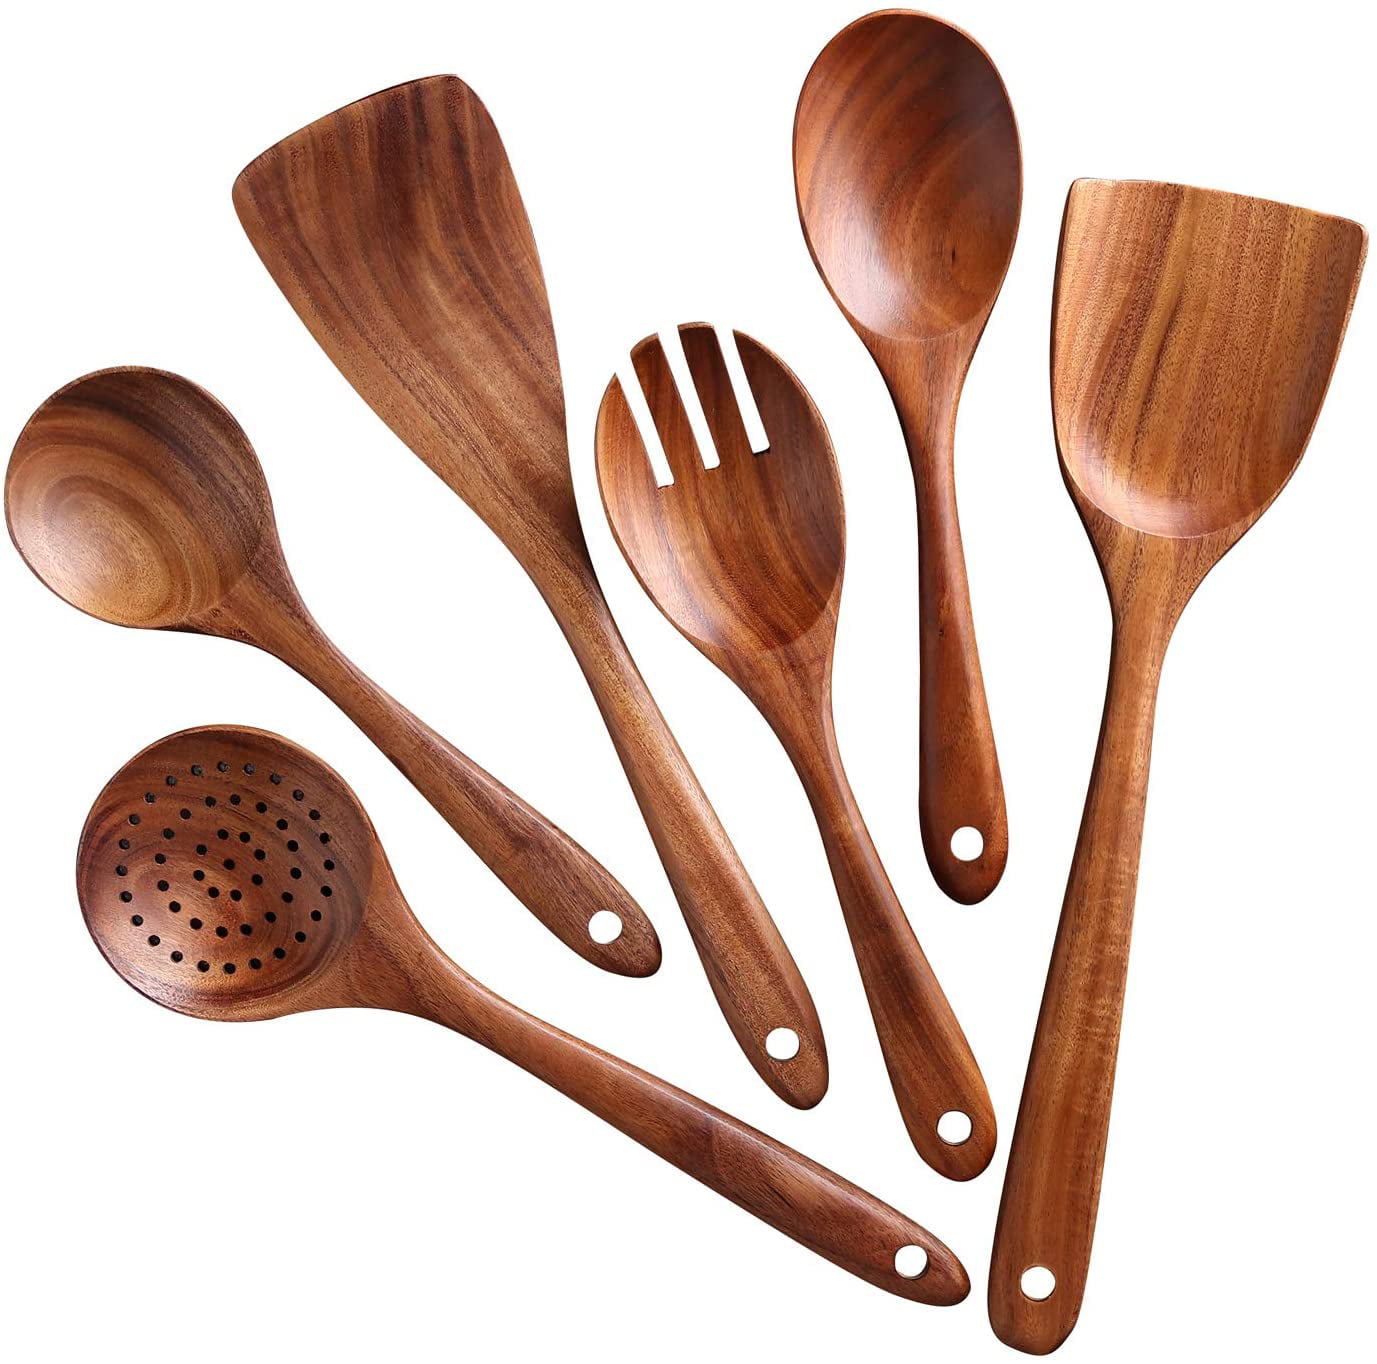 5 Pieces Bamboo Wooden Cooking Spoon Folwer and Heart Printed Kitchen Utensils Set Kitchen Spatula Cookware for Non-Stick Pans Best Valentines Day Gifts for Wife Girlfriend Monther